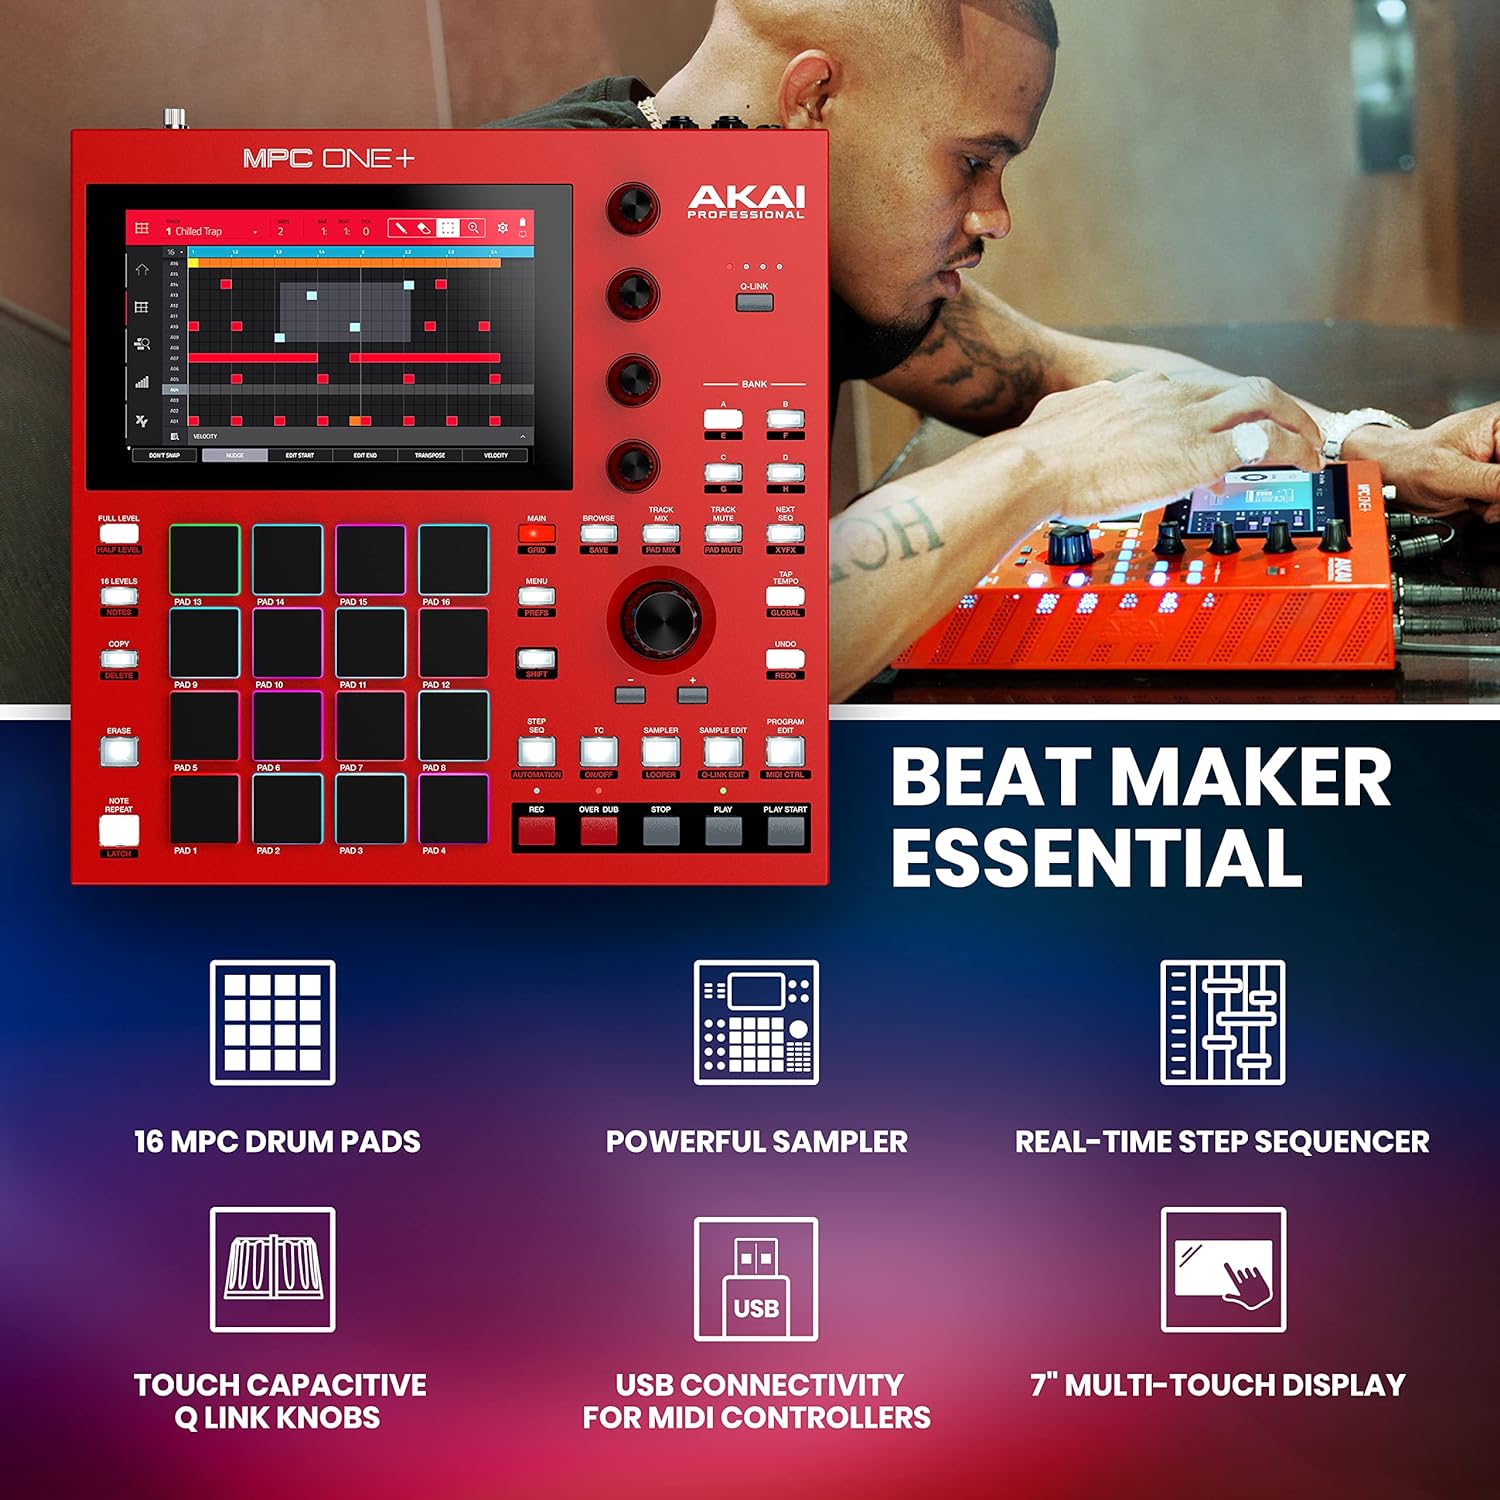 AKAI Professional MPC One+ Standalone Drum Machine, Beat Maker and MIDI Controller with WiFi, Bluetooth, Drum Pads, Synth Plug-ins and Touchscreen